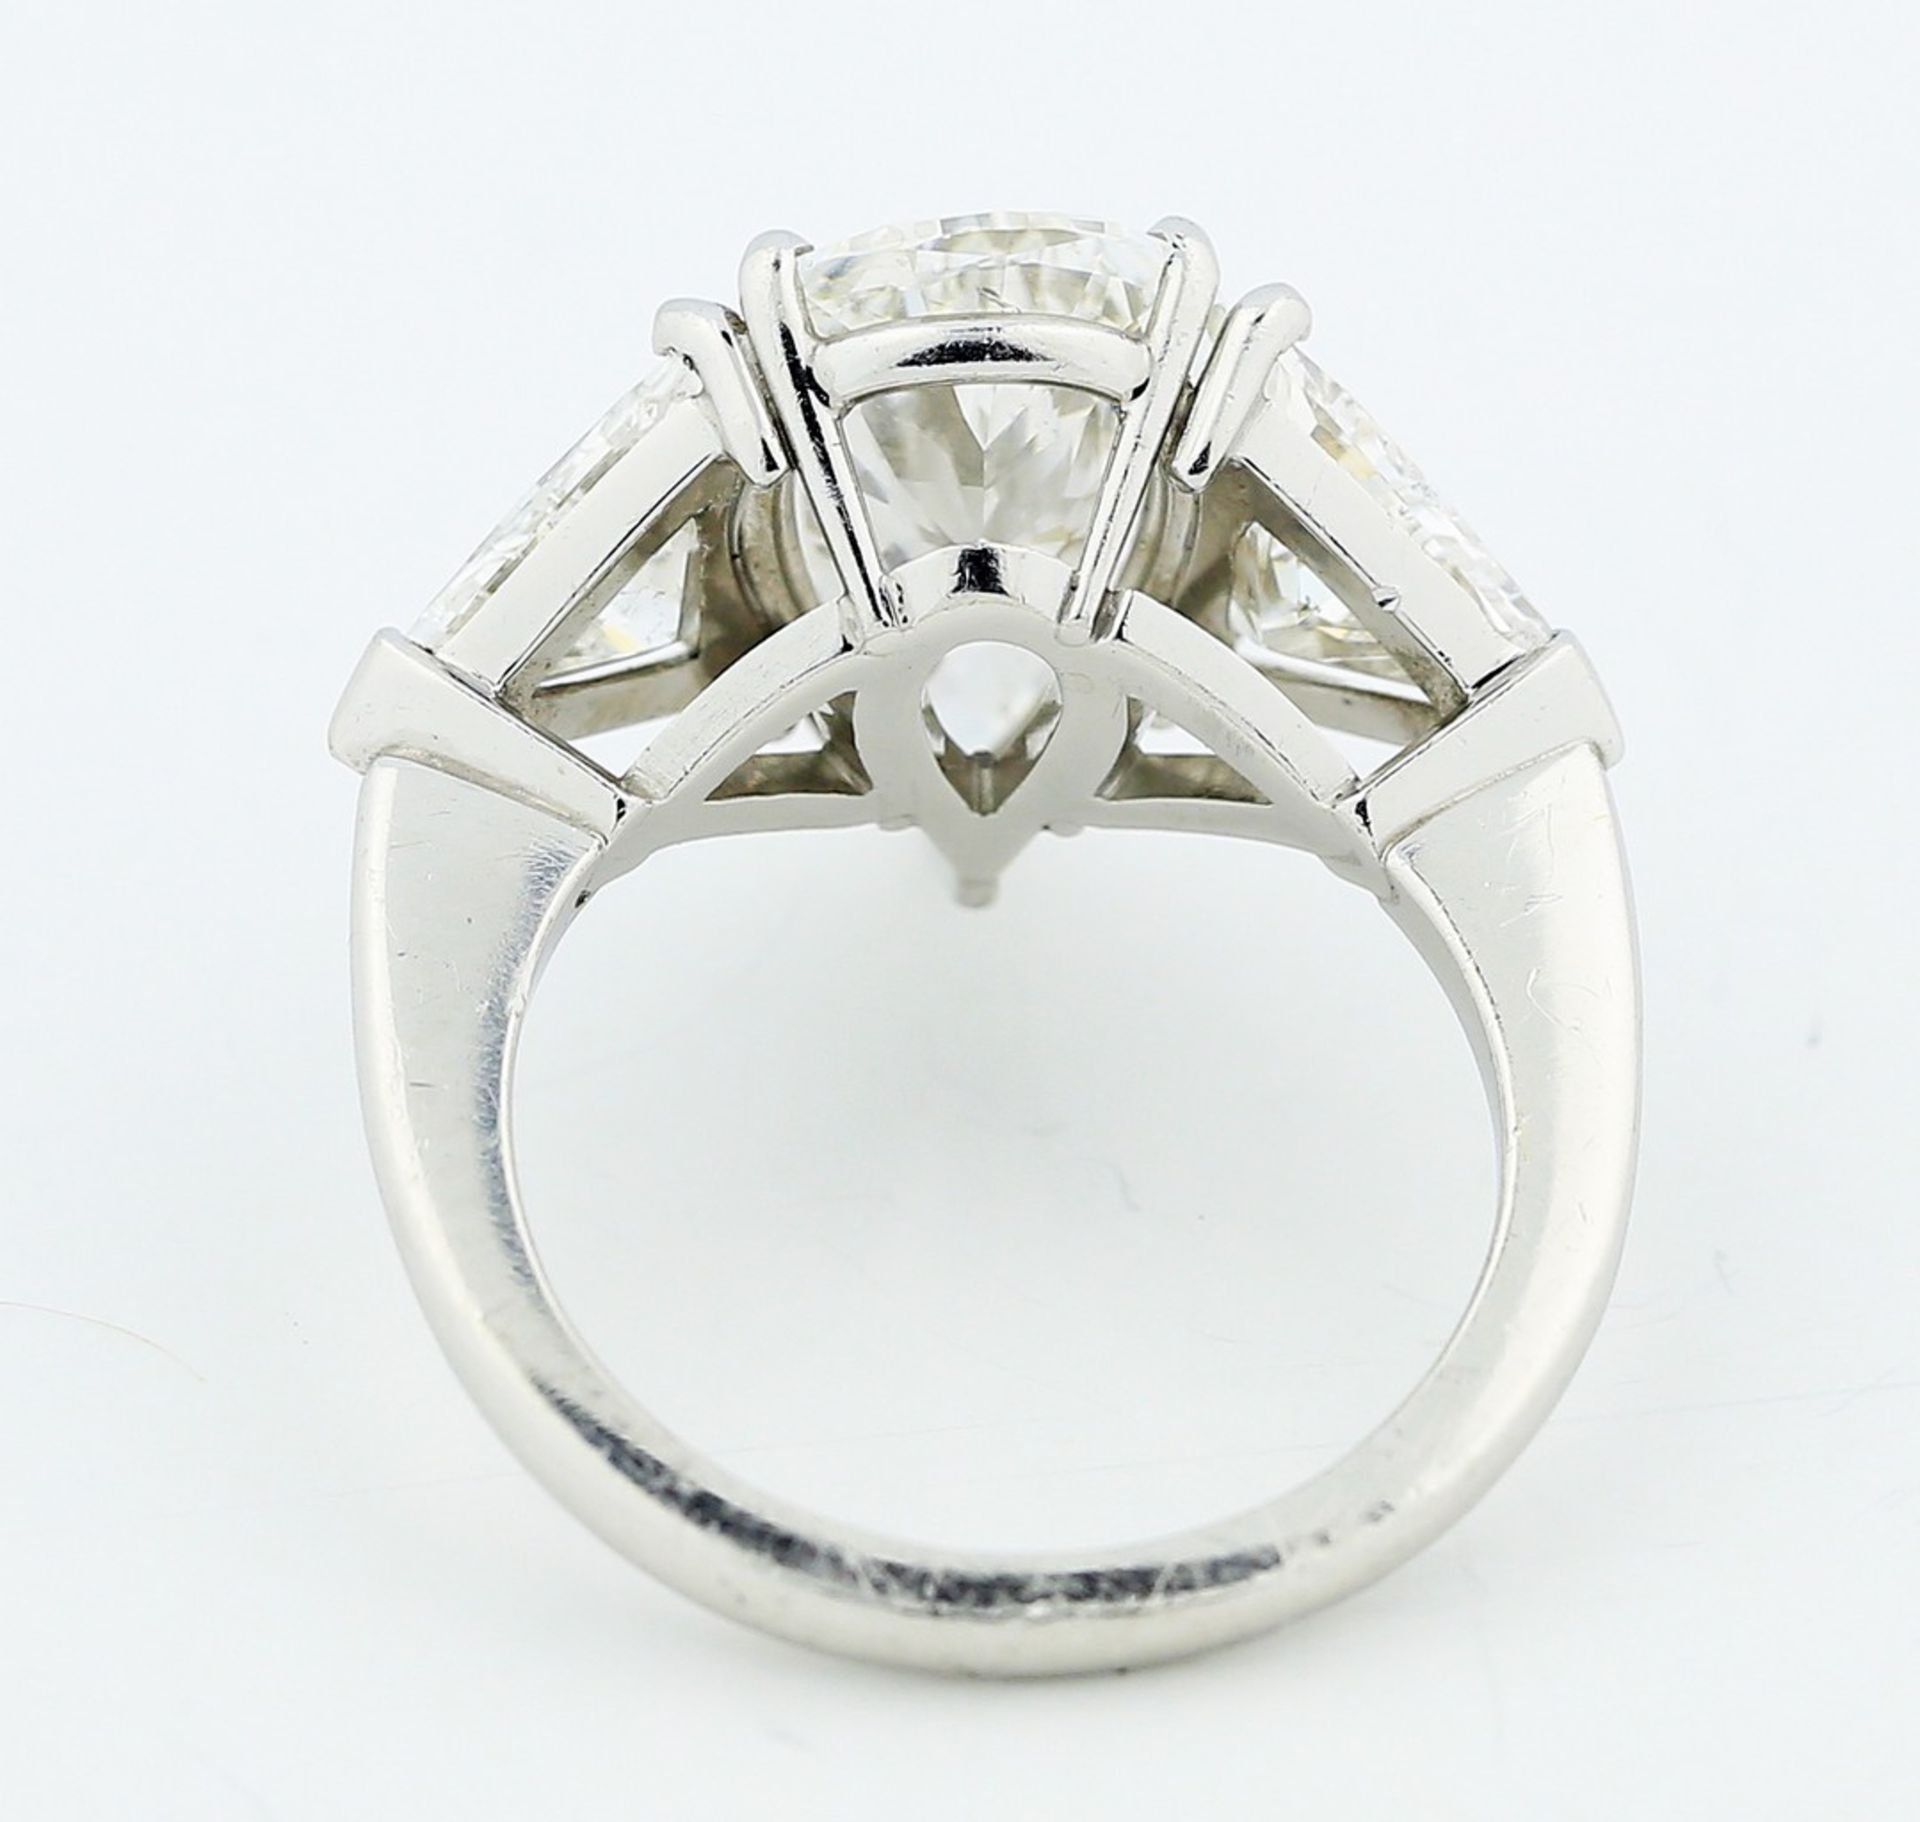 4.01 CARAT DIAMOND PLATINUM RING Centered by a pear-shaped diamond weighing 4.01 carats, flanked - Image 3 of 4